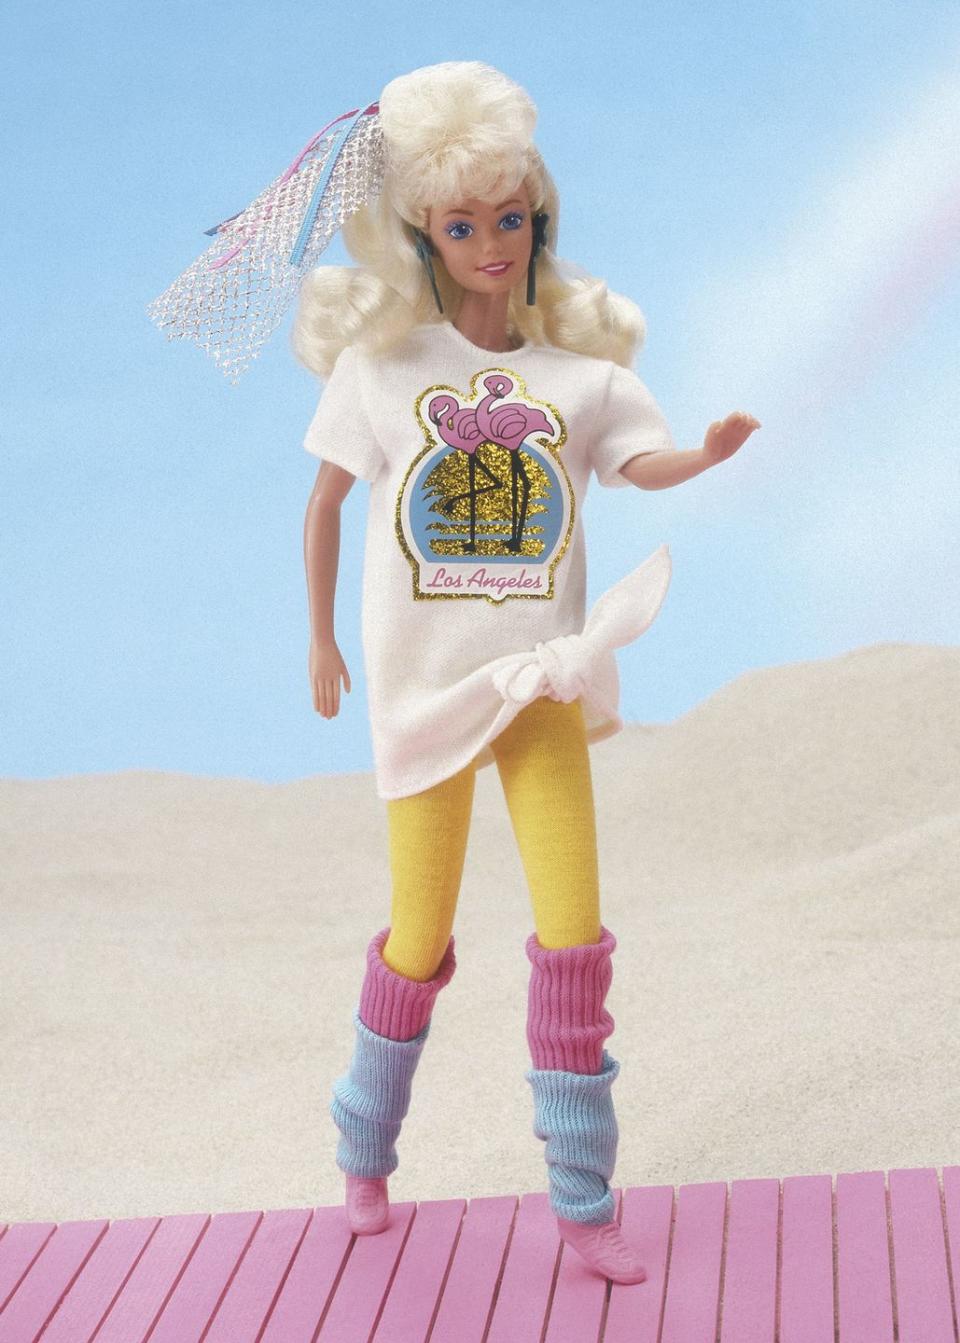 Doll, Toy, Pink, Barbie, Blond, Footwear, Joint, Wig, Costume, Action figure, 